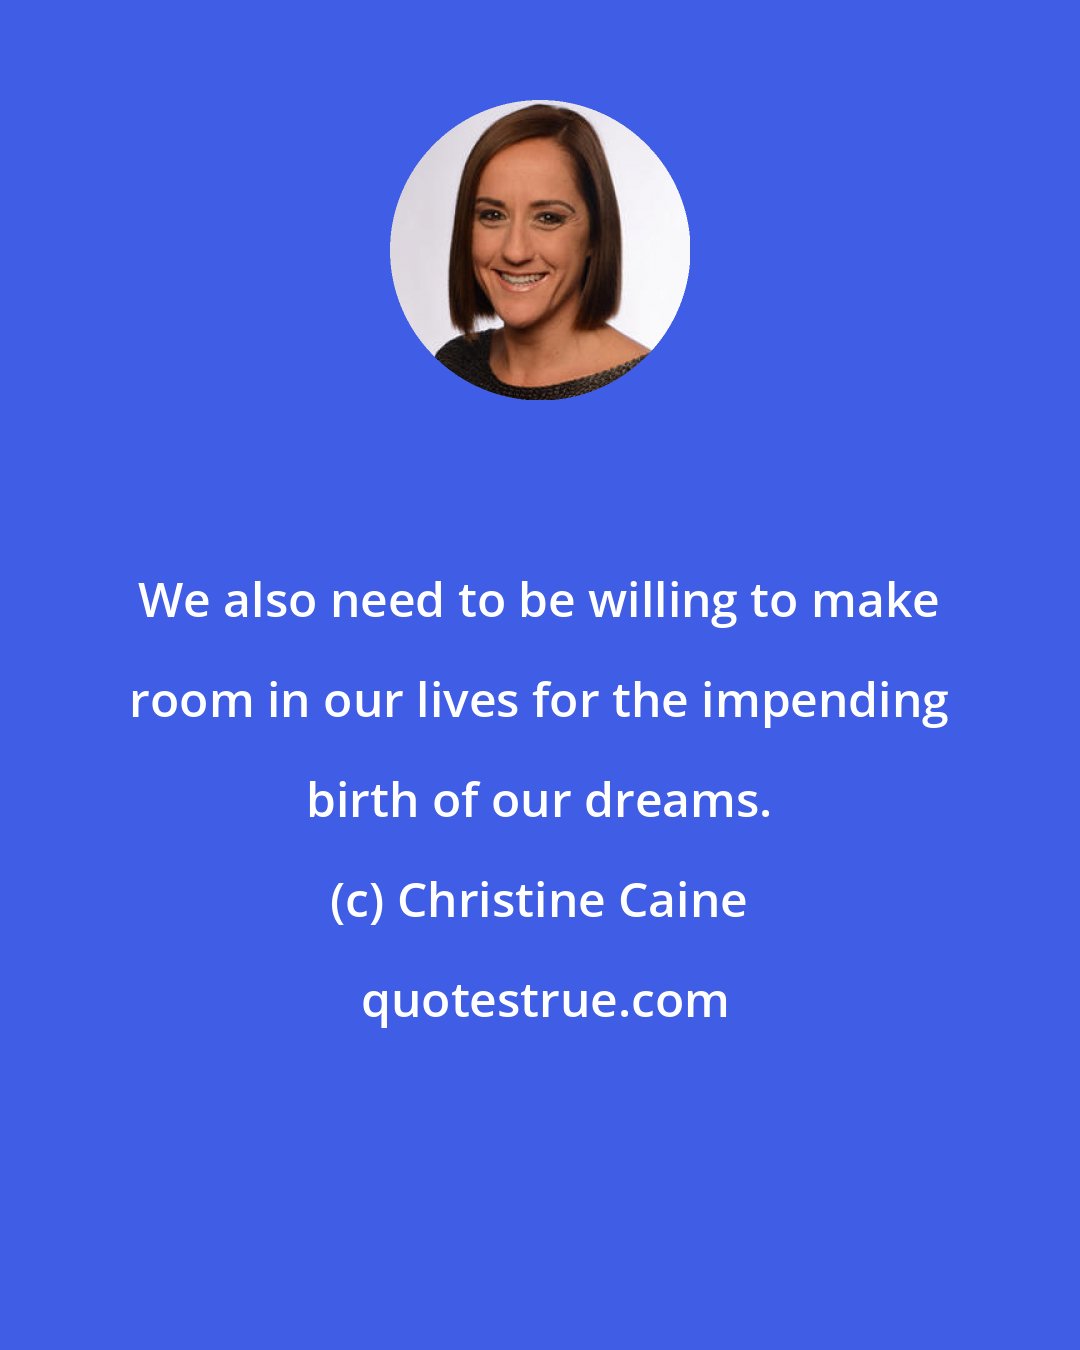 Christine Caine: We also need to be willing to make room in our lives for the impending birth of our dreams.